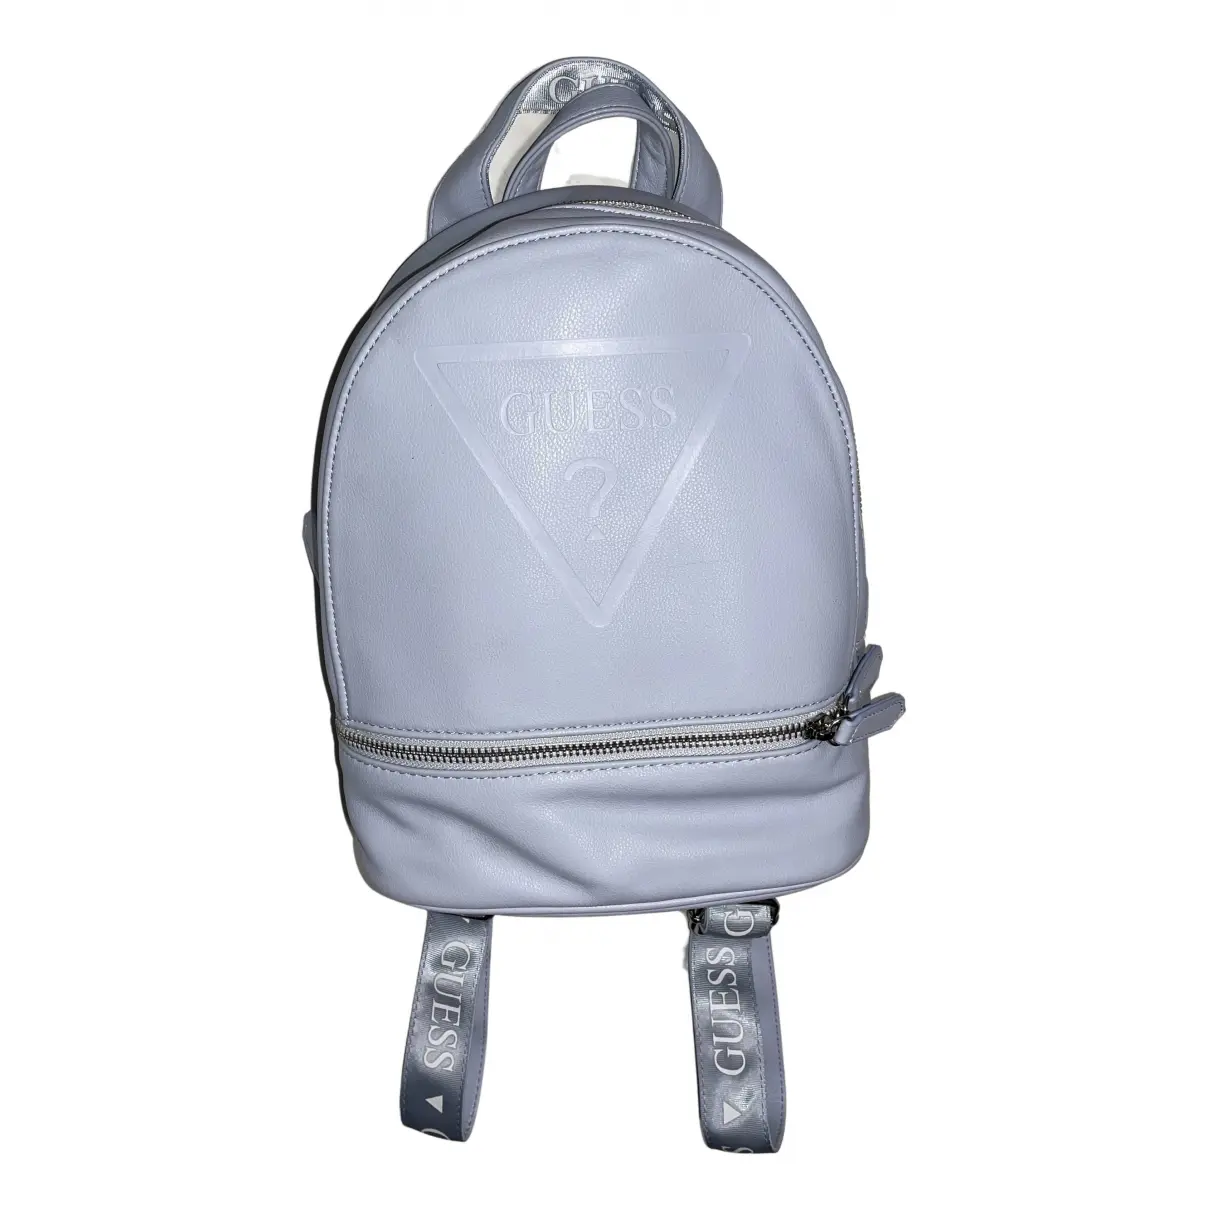 Vegan leather backpack GUESS